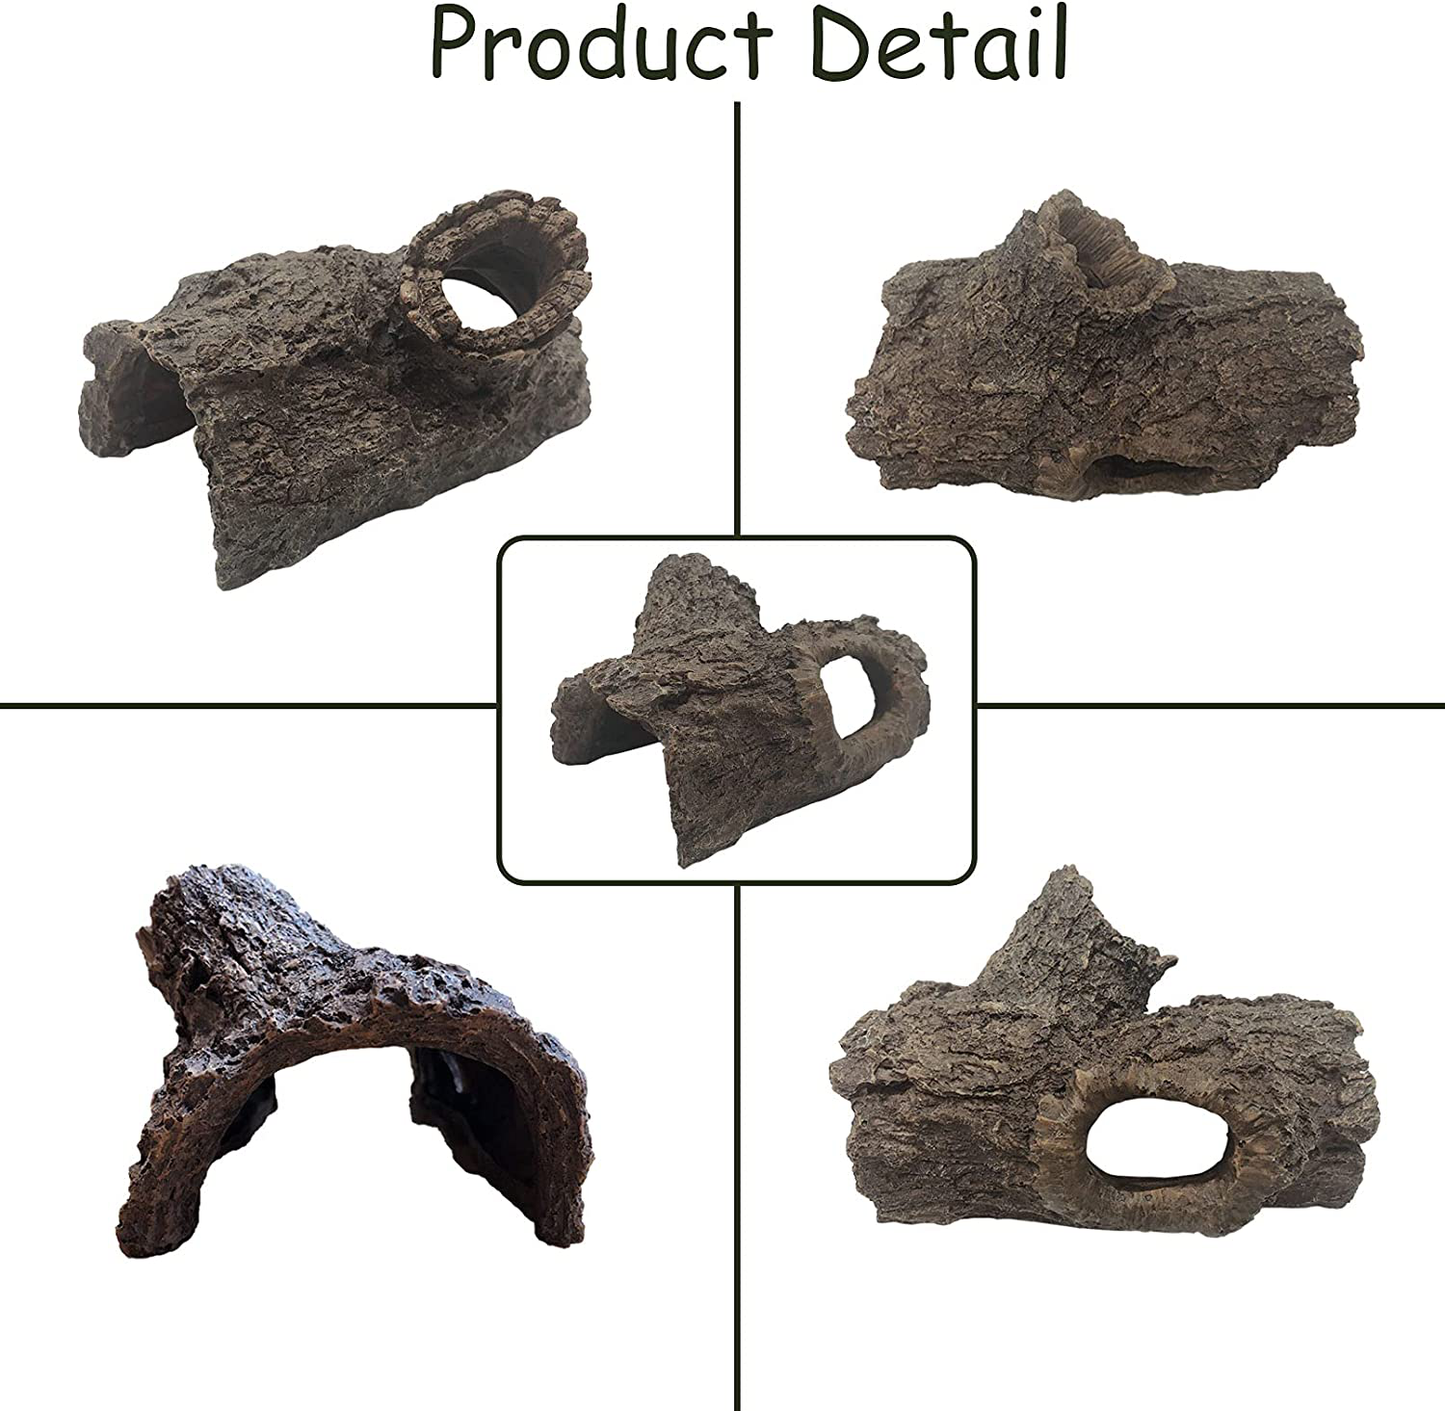 Tfwadmx Large Reptile Hideout Cave Lizard Resin Hollow Tree Trunk Habitat Decoration Decaying Driftwood Hut Ornament Bark Bend Tank Decor Terrarium Accessories for Gecko,Chameleon and Hermit Crabs